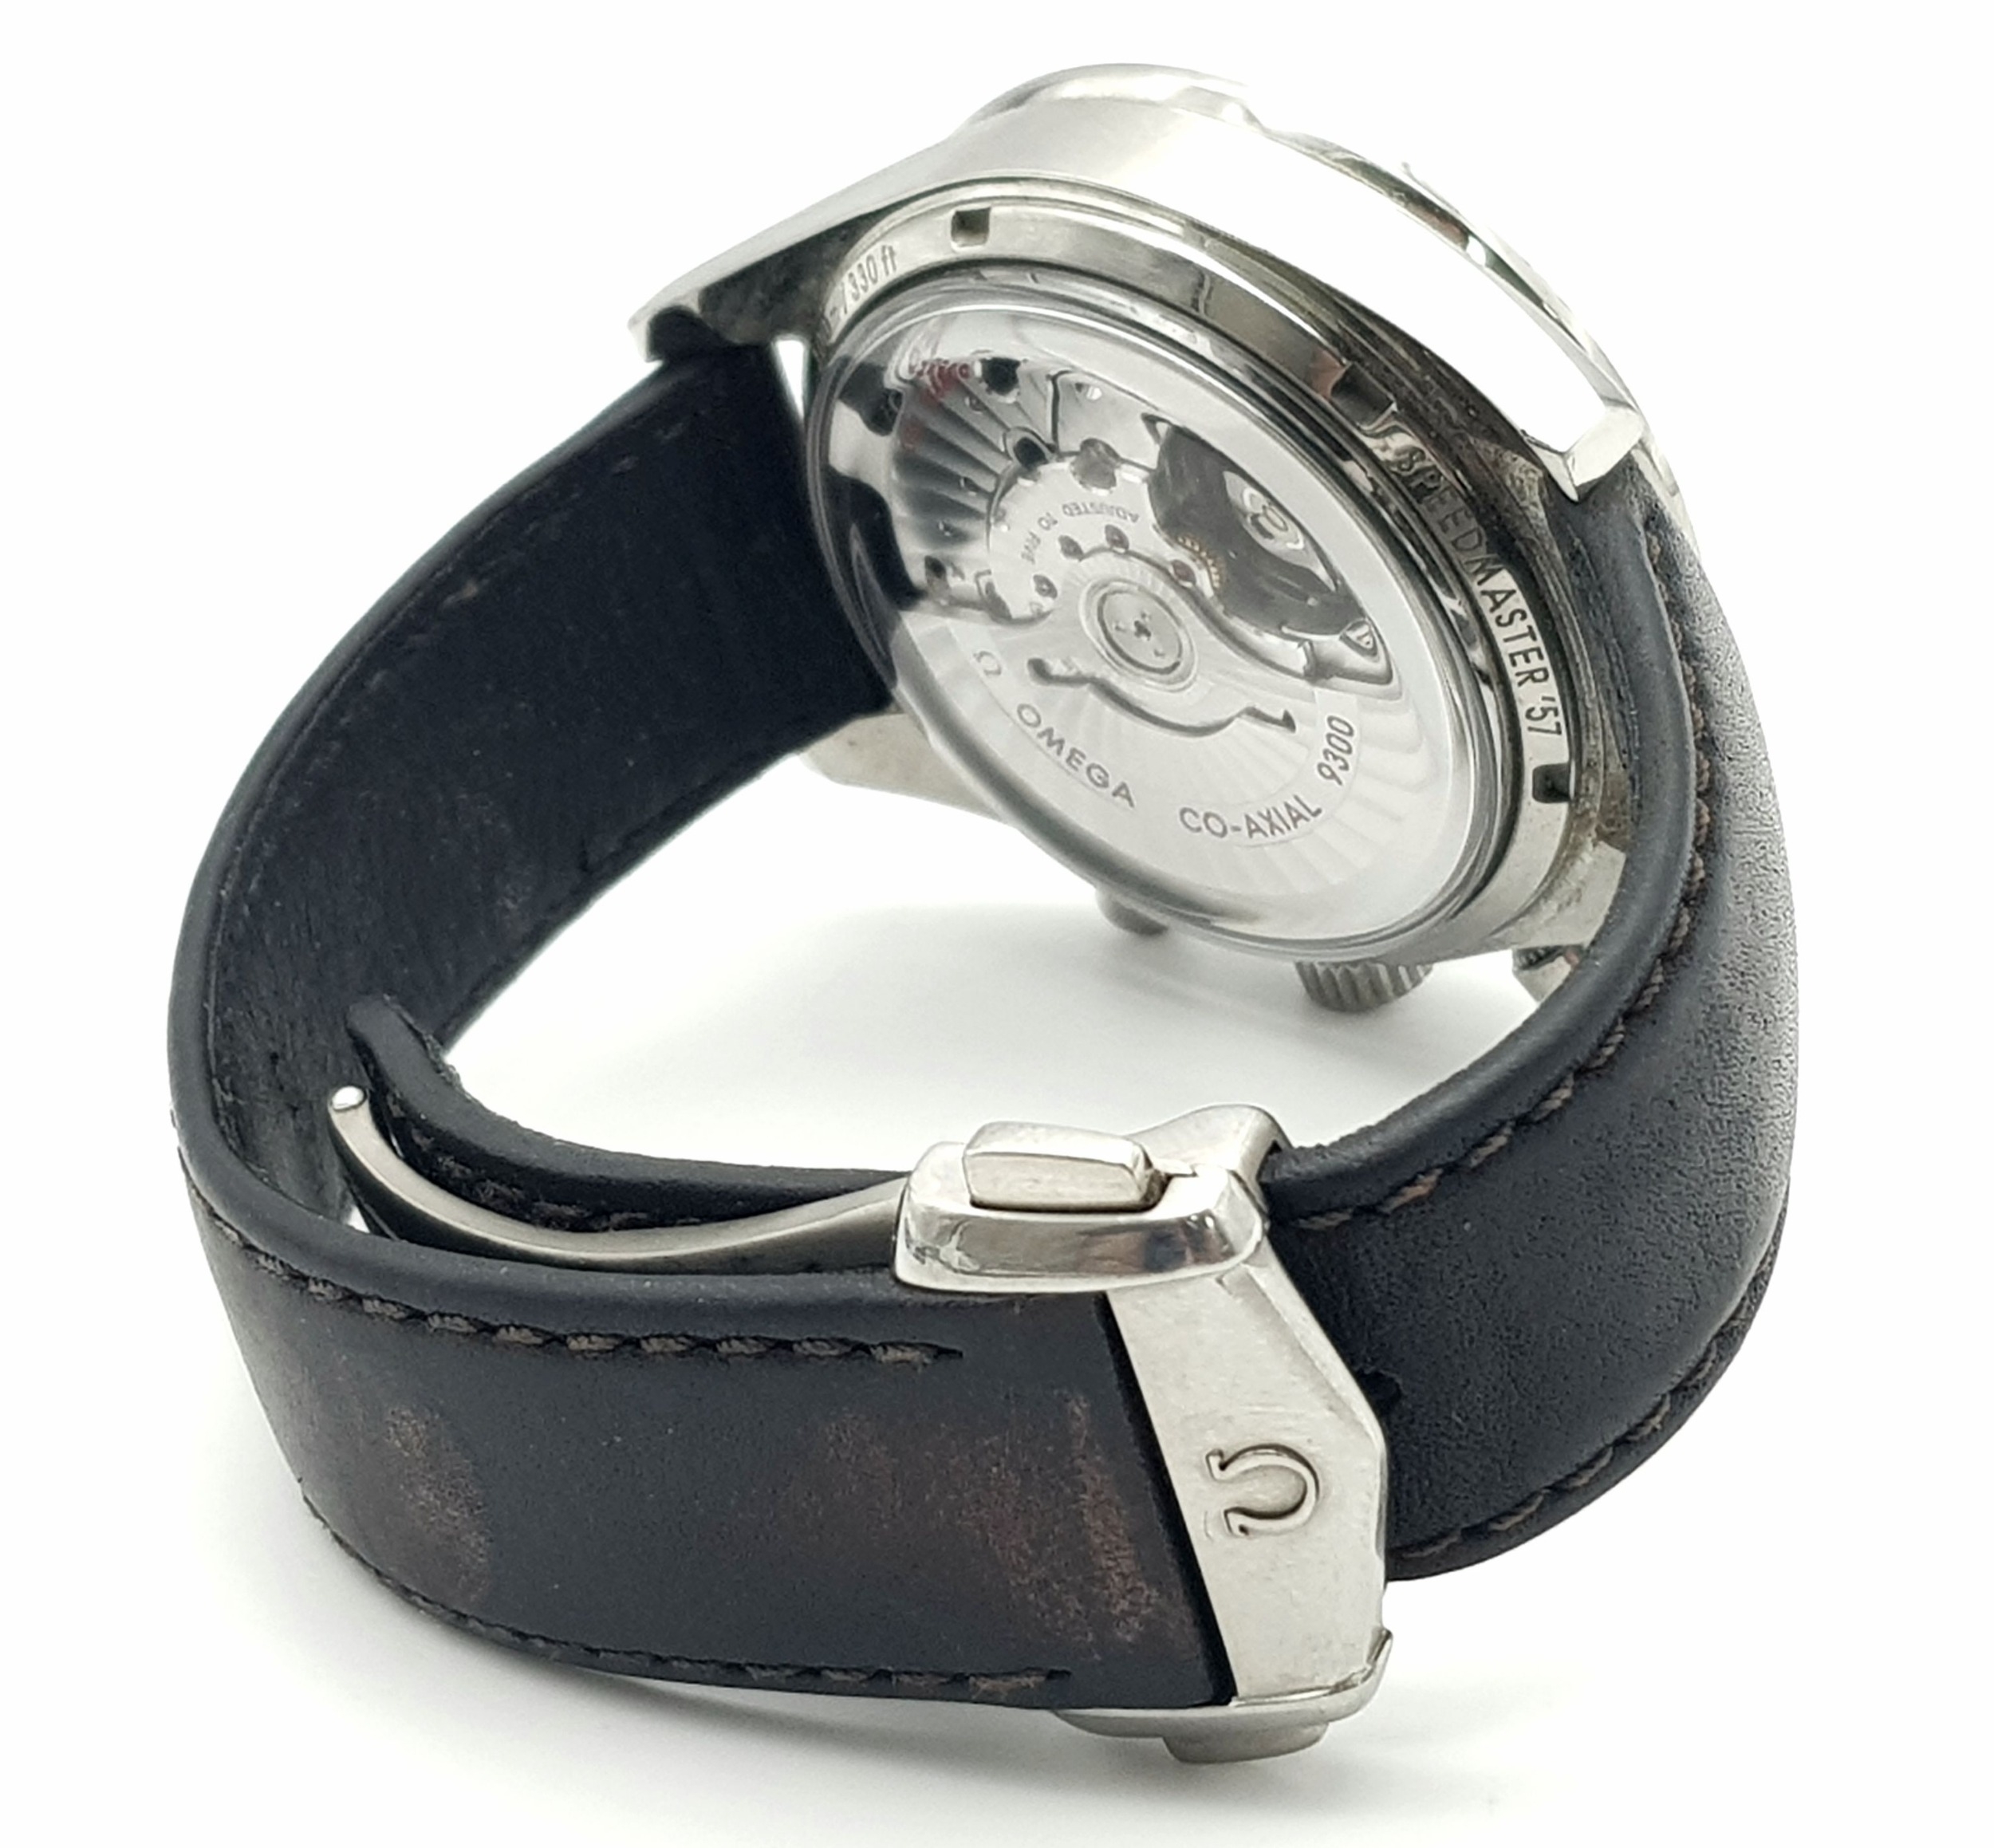 An Omega Speedmaster Automatic Co-Axial Chronograph Gents Watch. Black leather tag strap. - Image 4 of 7